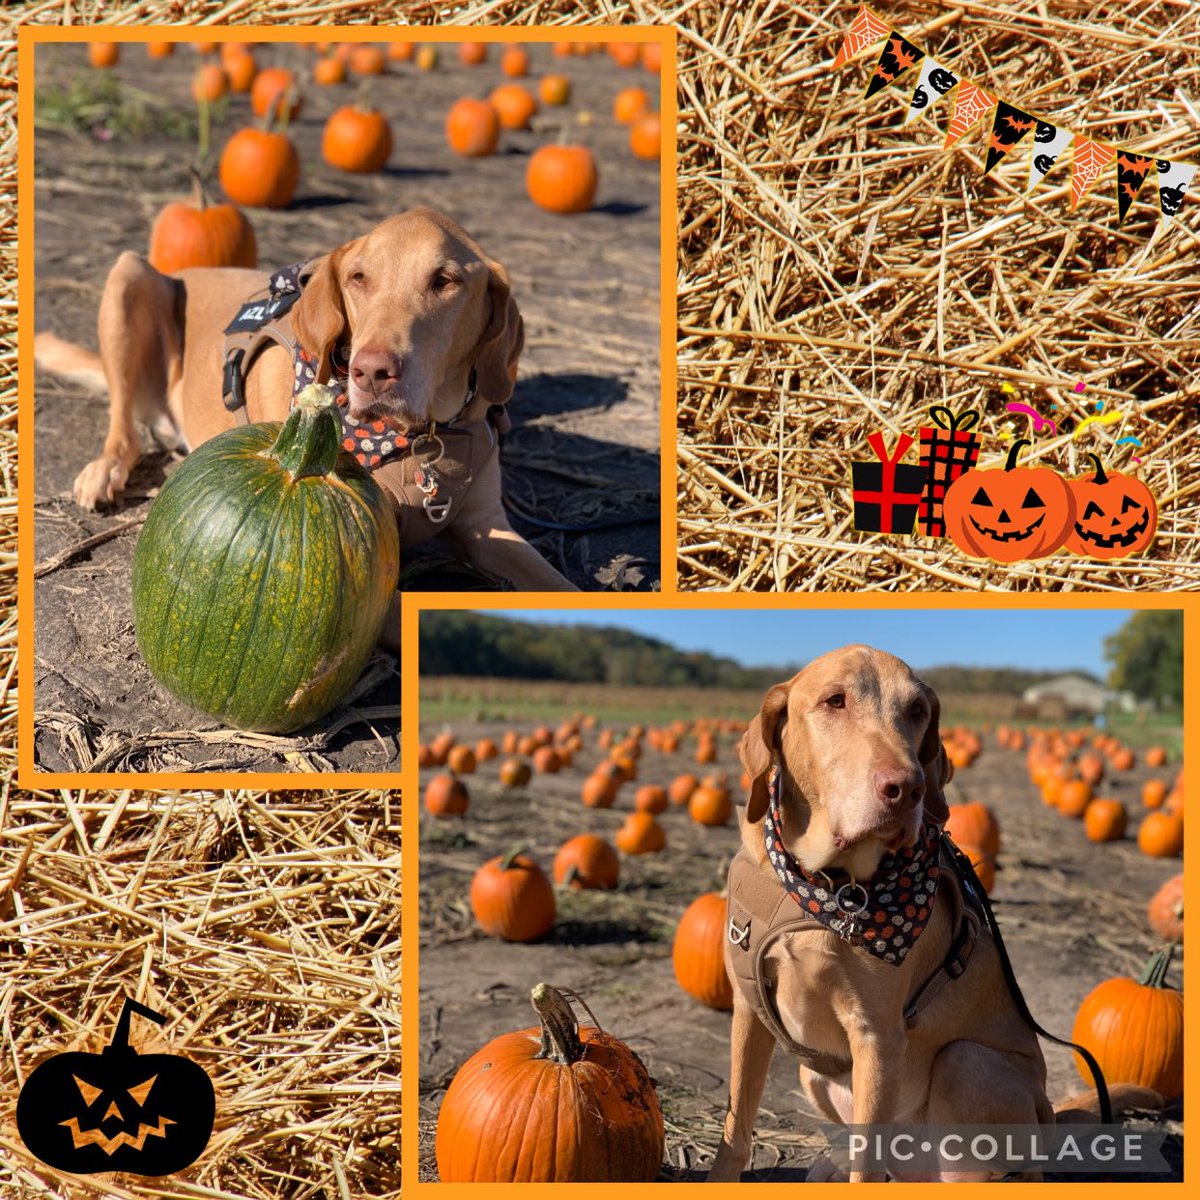 Today is #NationalPumpkinDay 🎃

We’re in St.Louis & Mom just took me to pumpkin patch🐾❤️🎃🌾Share your Fall/Pumpkins photos if you have any! Love you🐾🎃🍁 #dogsoftwitter #PumpkinDay #PumpkinPatch #cute #fall #dogslife